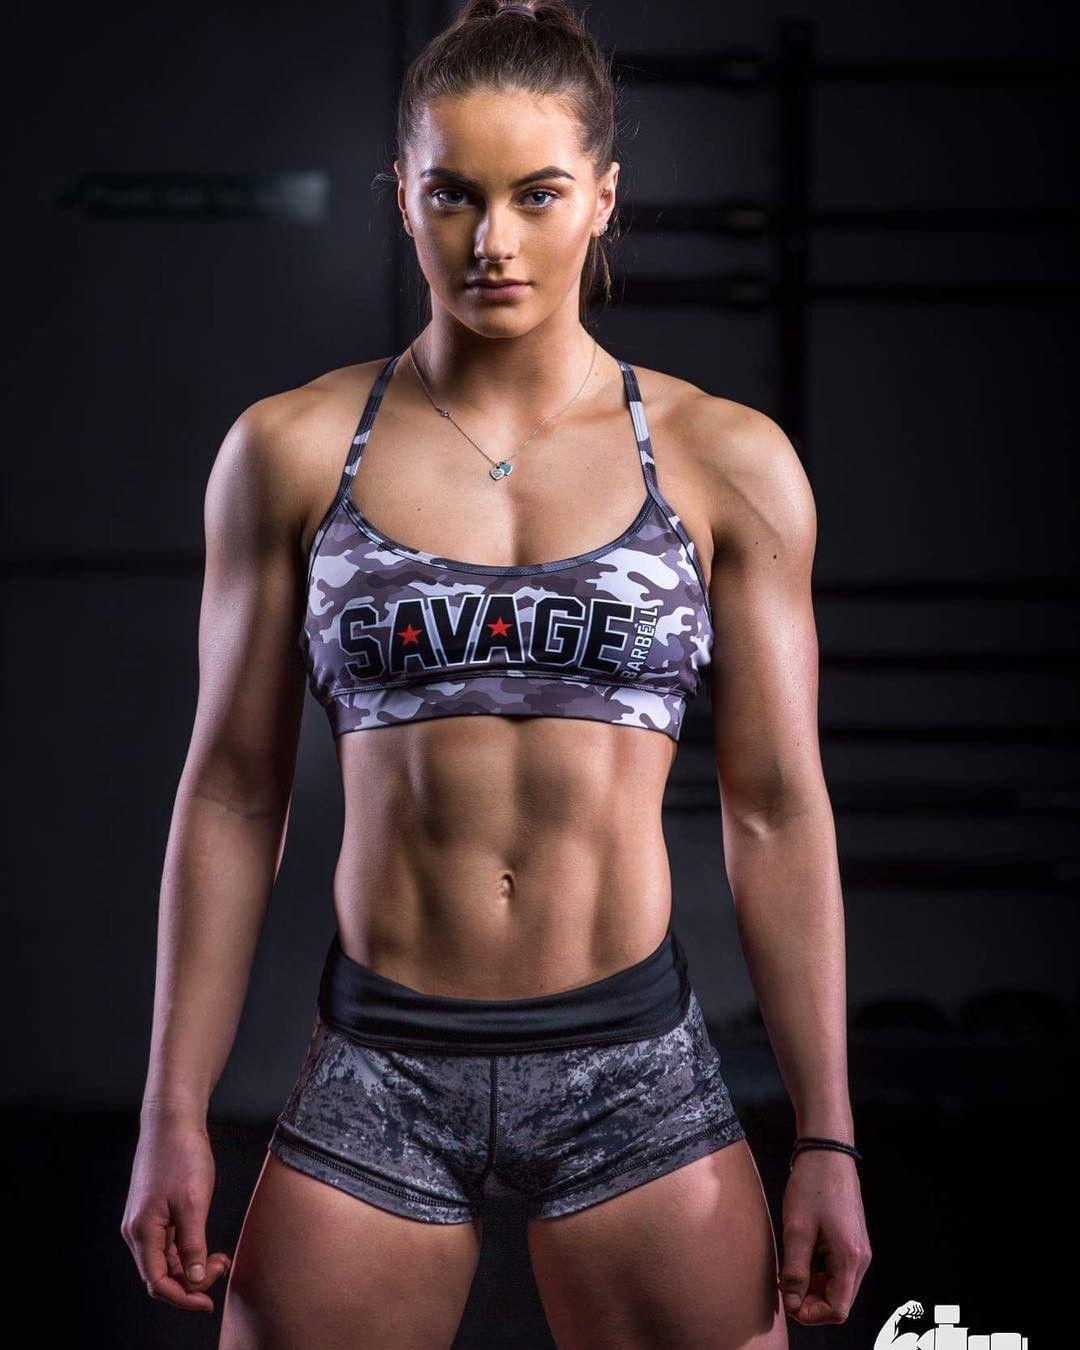 Top 40 Sexiest Crossfit Women Of All Time – 2020 | Best Of Comic Books